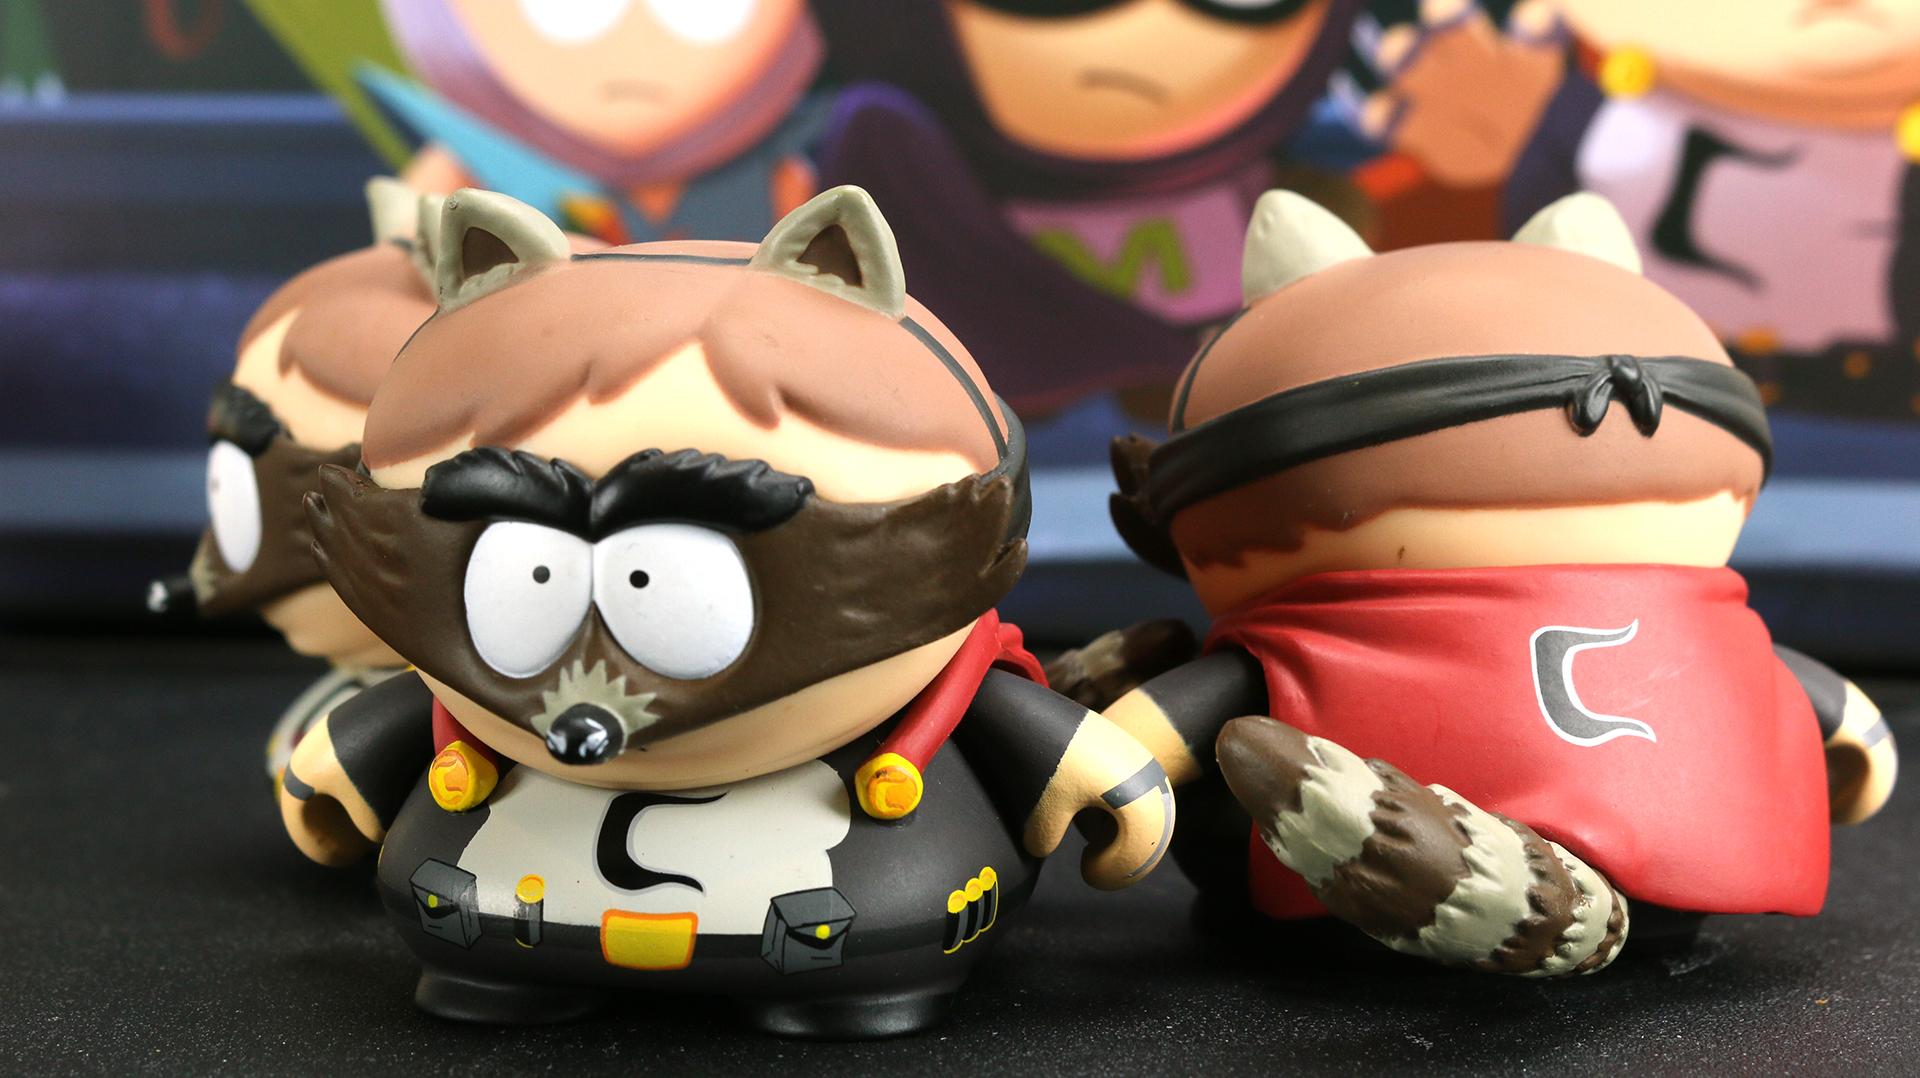 Toy Time Cracks Open A Case Of South Park: The Fractured But Whole Figures